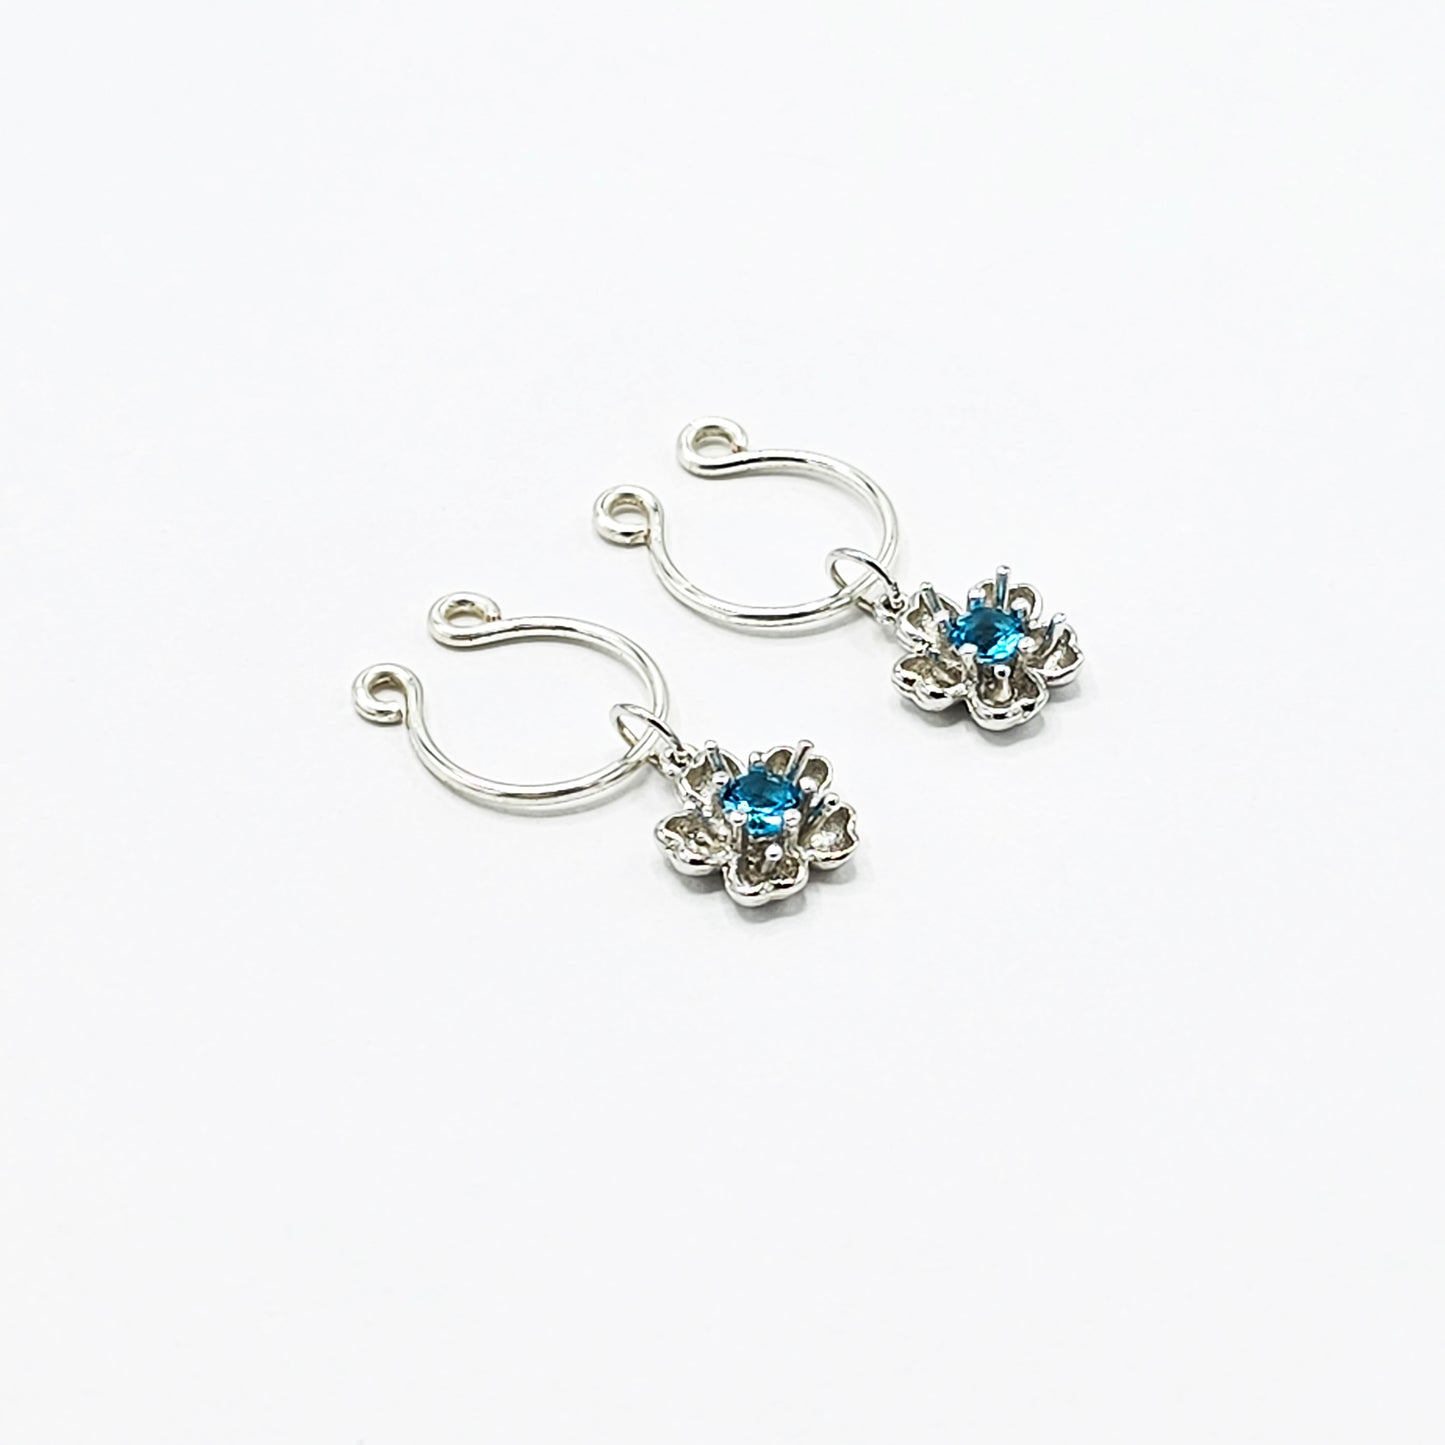 Non Piercing Nipples Jewelry, Sterling Silver Flower Nipple Rings. Sexy Nipple Rings with Blue Gem Flowers.